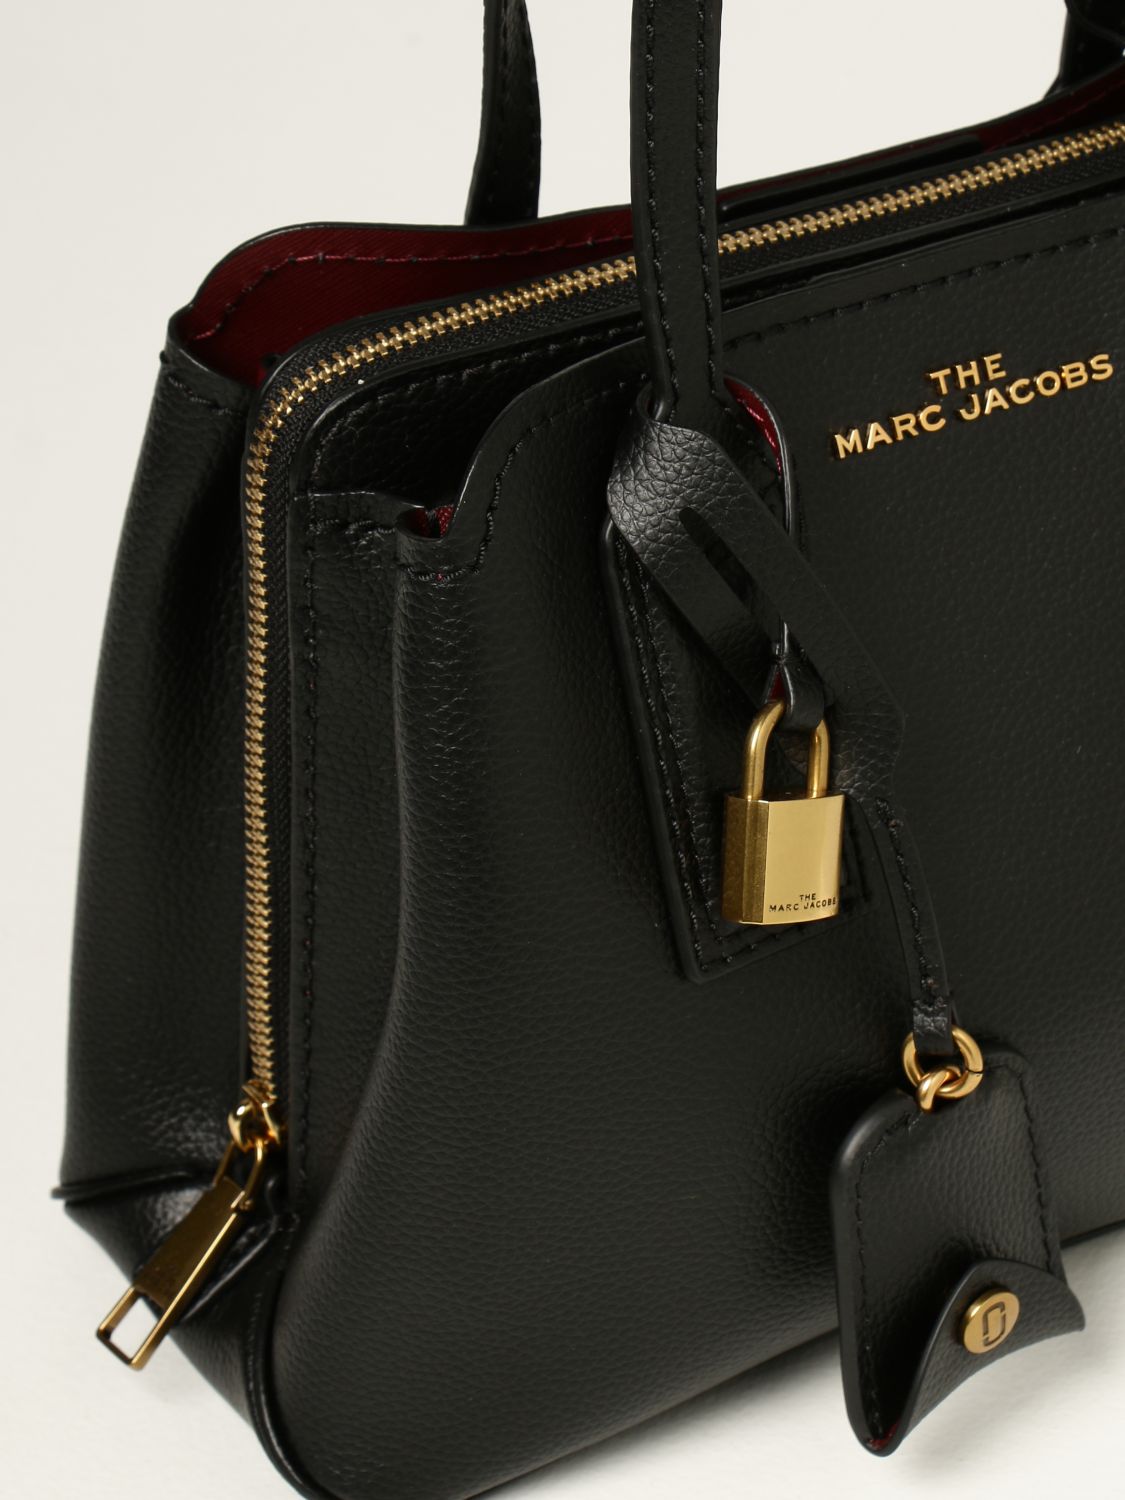 New Brand Identity: Marc Jacobs by Triboro — BP&O